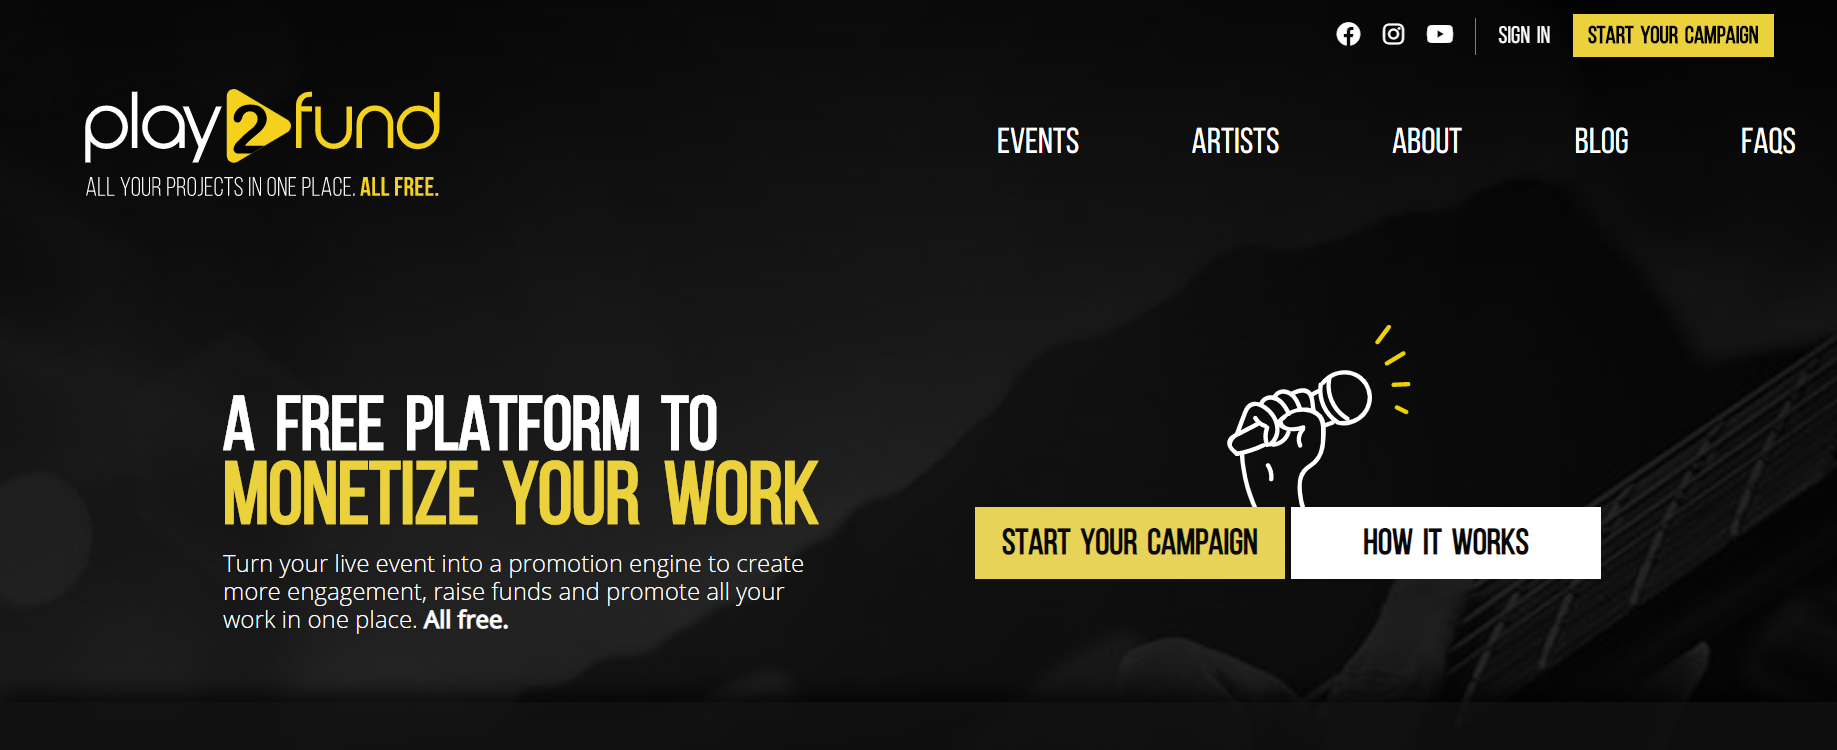 Play2Fund a free platform to monetize your work. Crowdunding campaigns for musicians hosting virtual concerts.